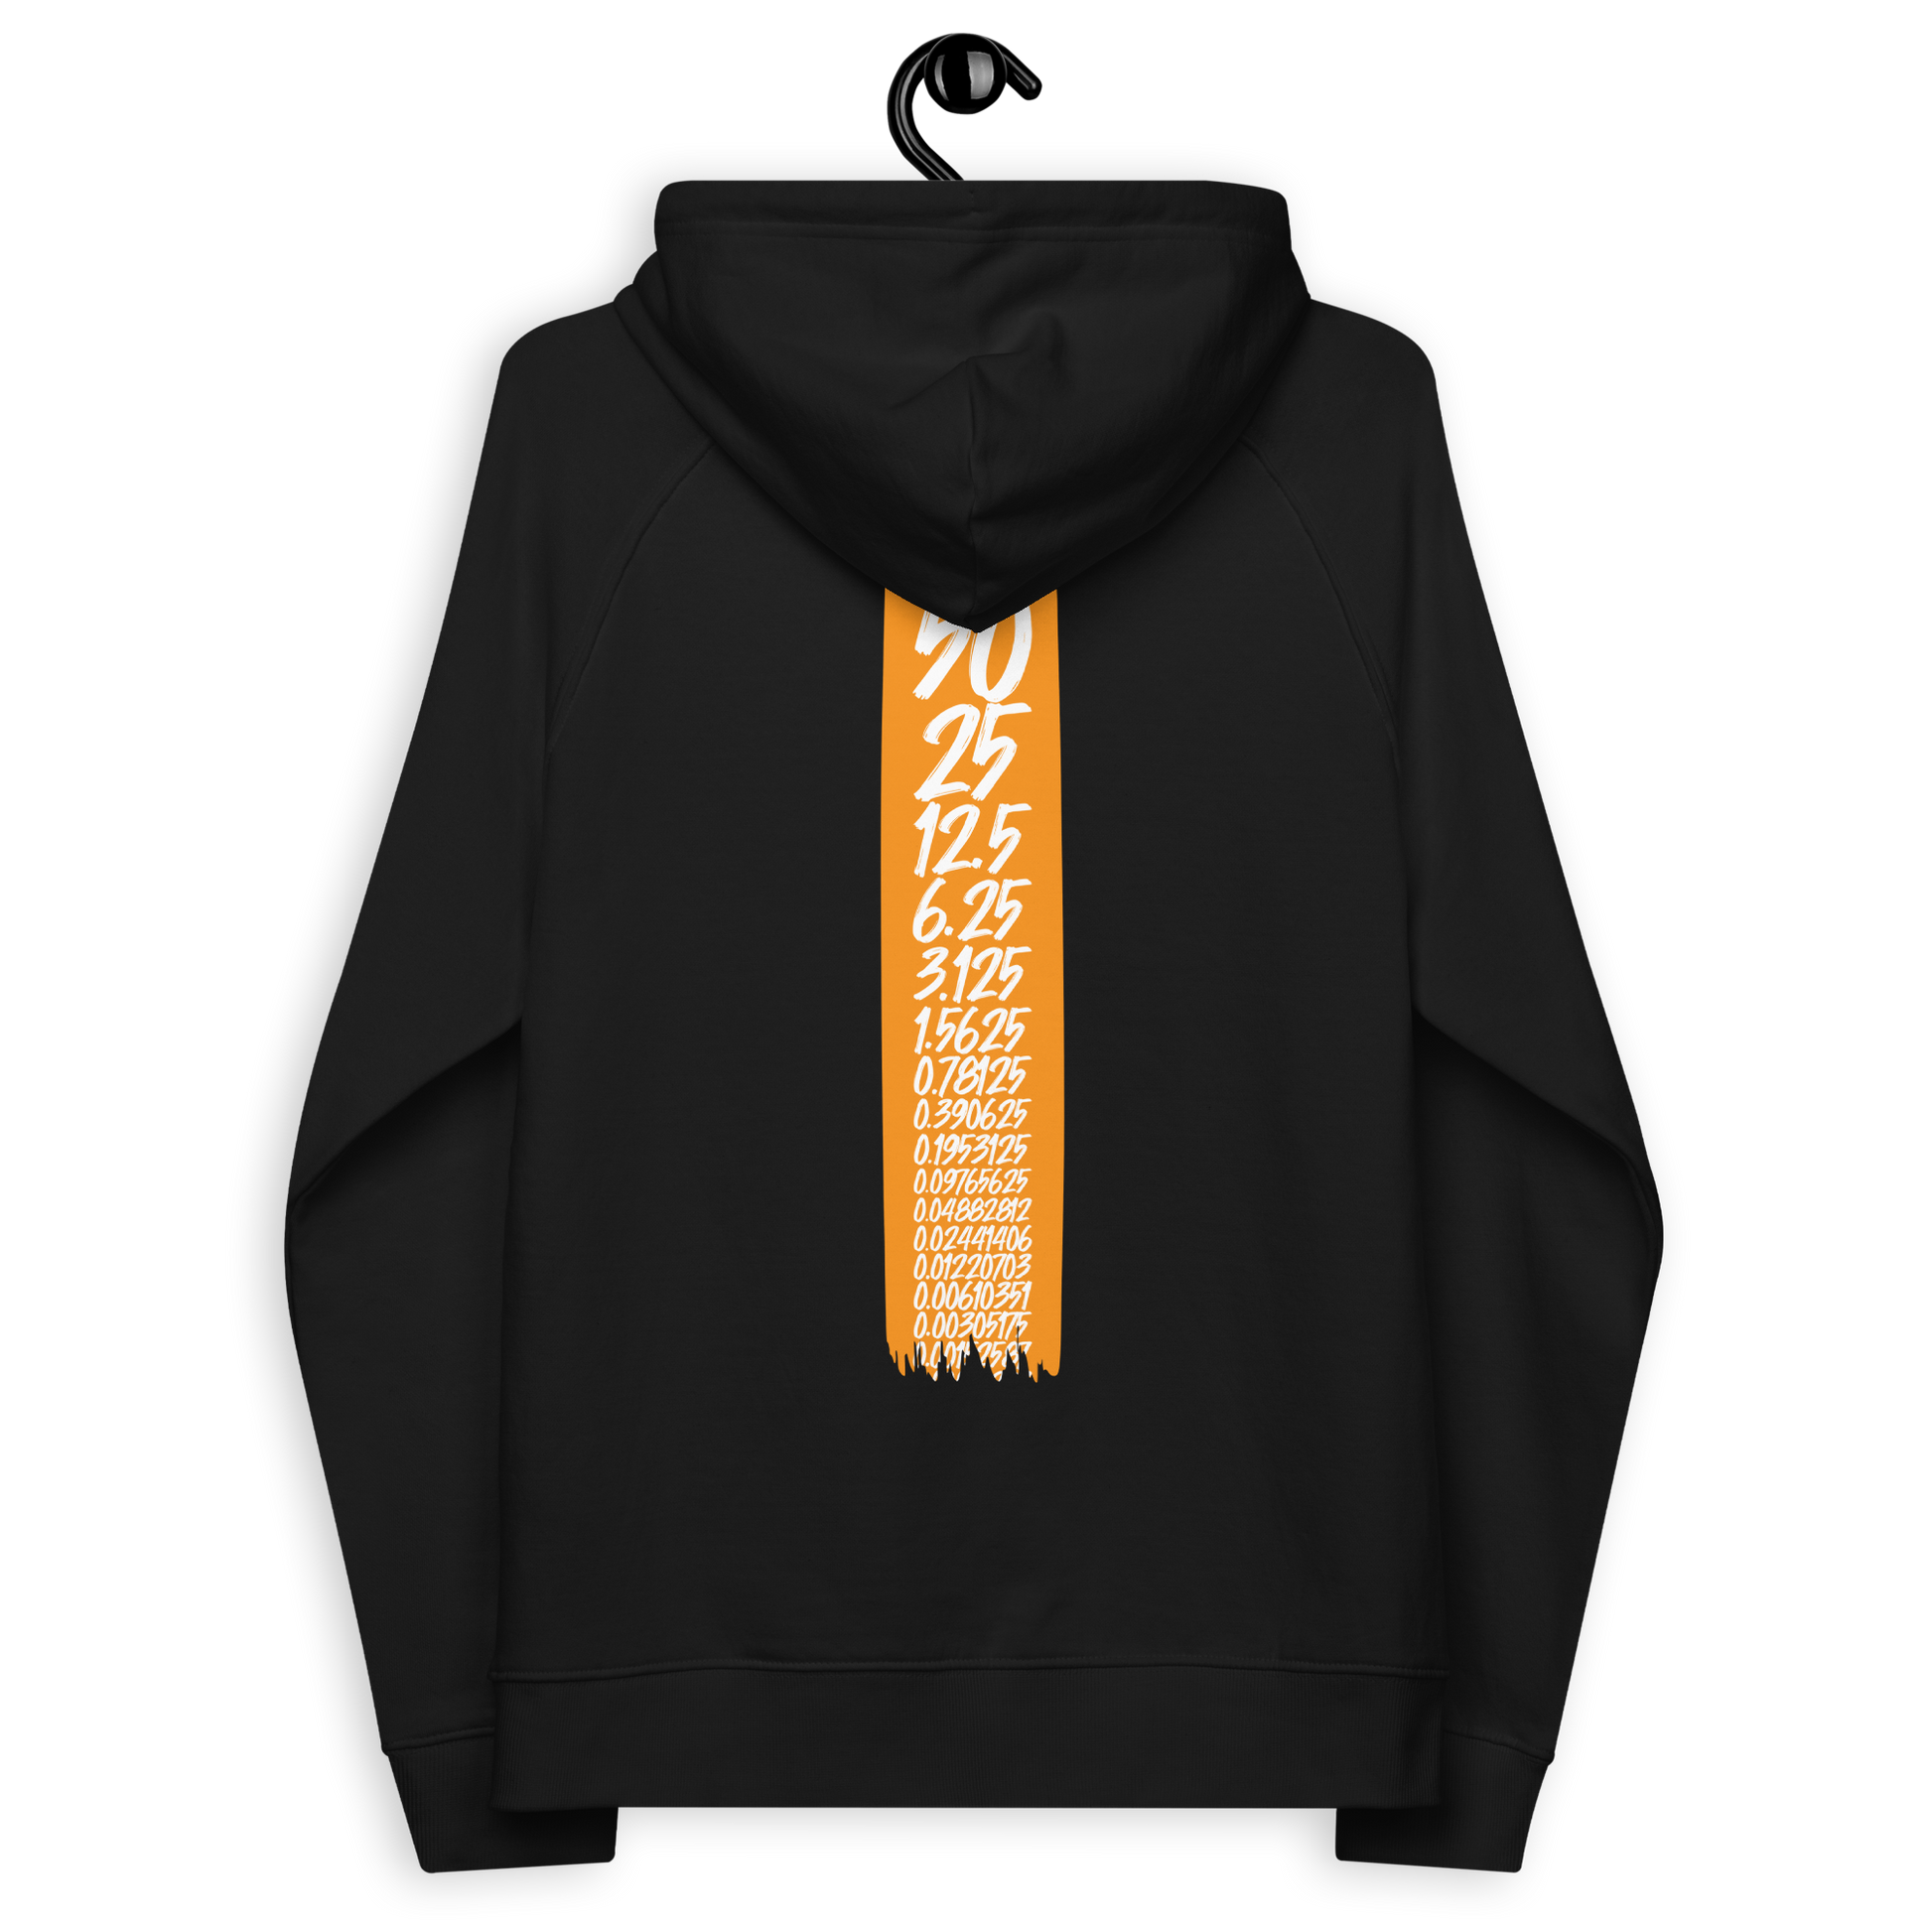 Back view of a black bitcoin hoodie.